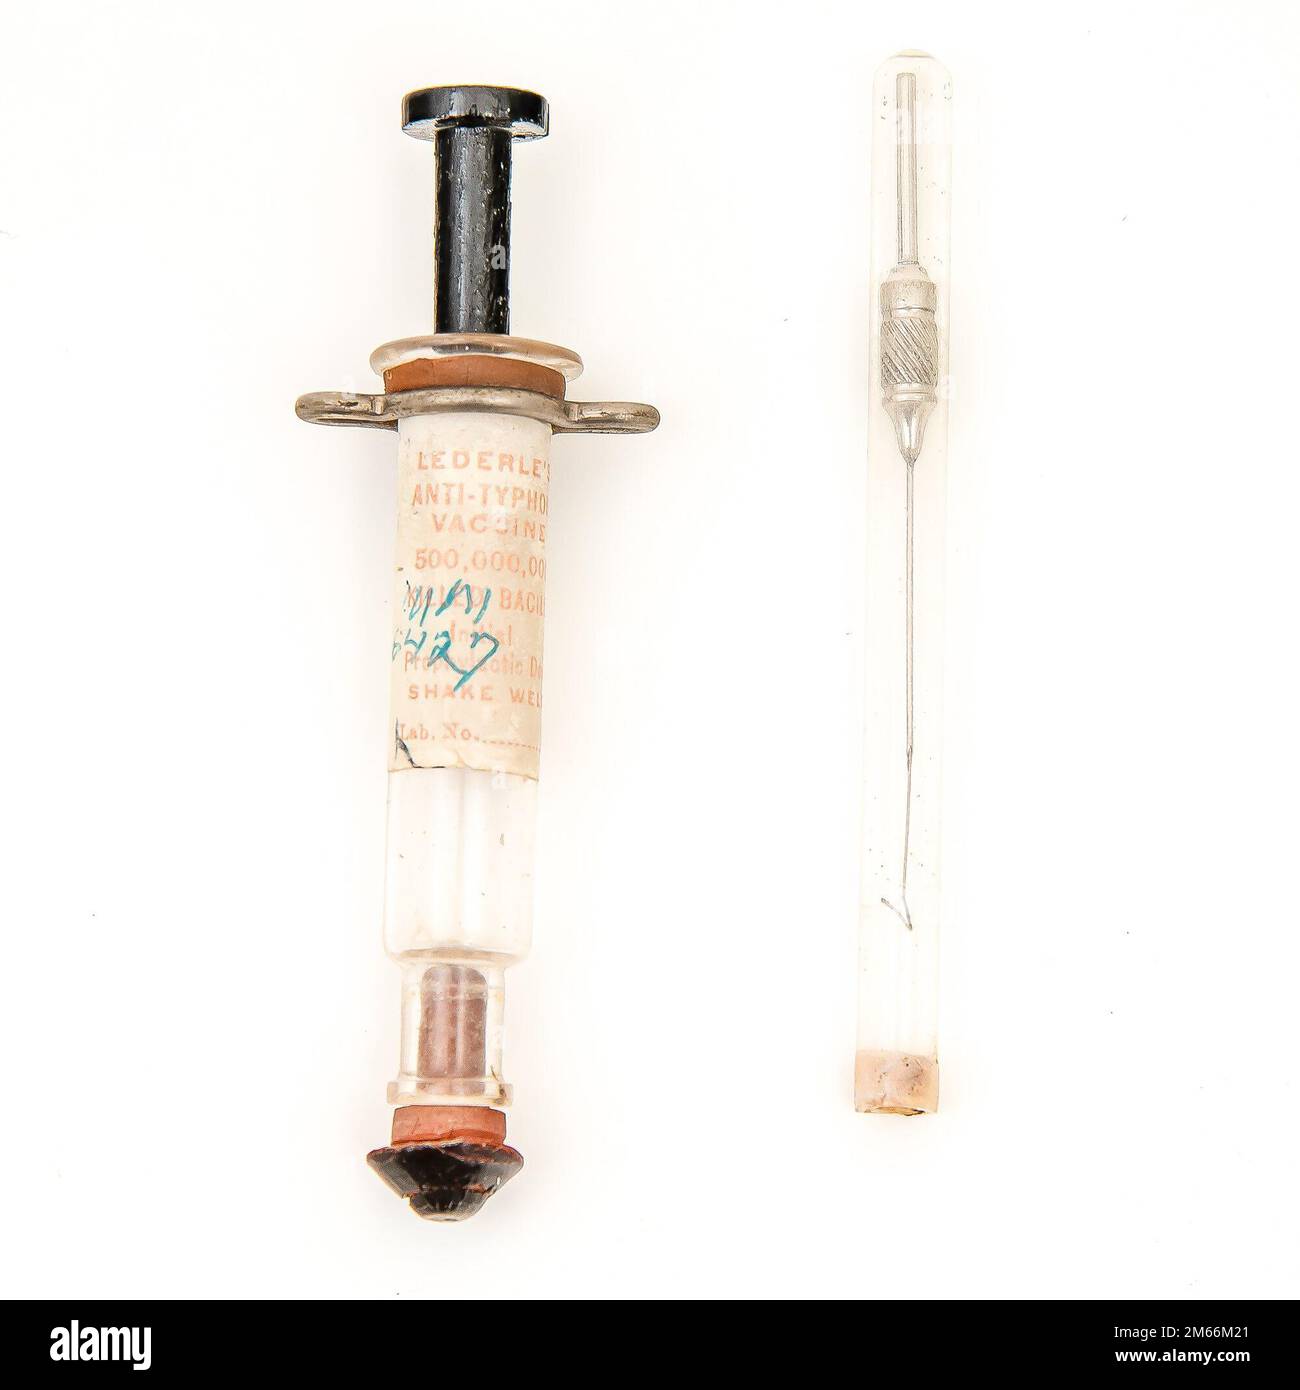 Description: Syringe and Needle    Caption: This is a Lederle Aseptic Anti-Typhoid Syringe, manufactured by E. J. Lederle of New York City. It was acquired by the Army Medical Museum in Washington, D.C., in 1912. The label on the syringe reads, “Lederle’s Anti-Typhoid Vaccine. 1,000,000 killed bacilli 2d of 3d prophylactic dose.” The syringe was patented three years after Capt. Frederick Russell’s clinical trial at the Army Medical Museum, which demonstrated the safety and effectiveness of the vaccine. As a result of the trial, the U.S. Army became the first military to vaccinate against typho Stock Photo